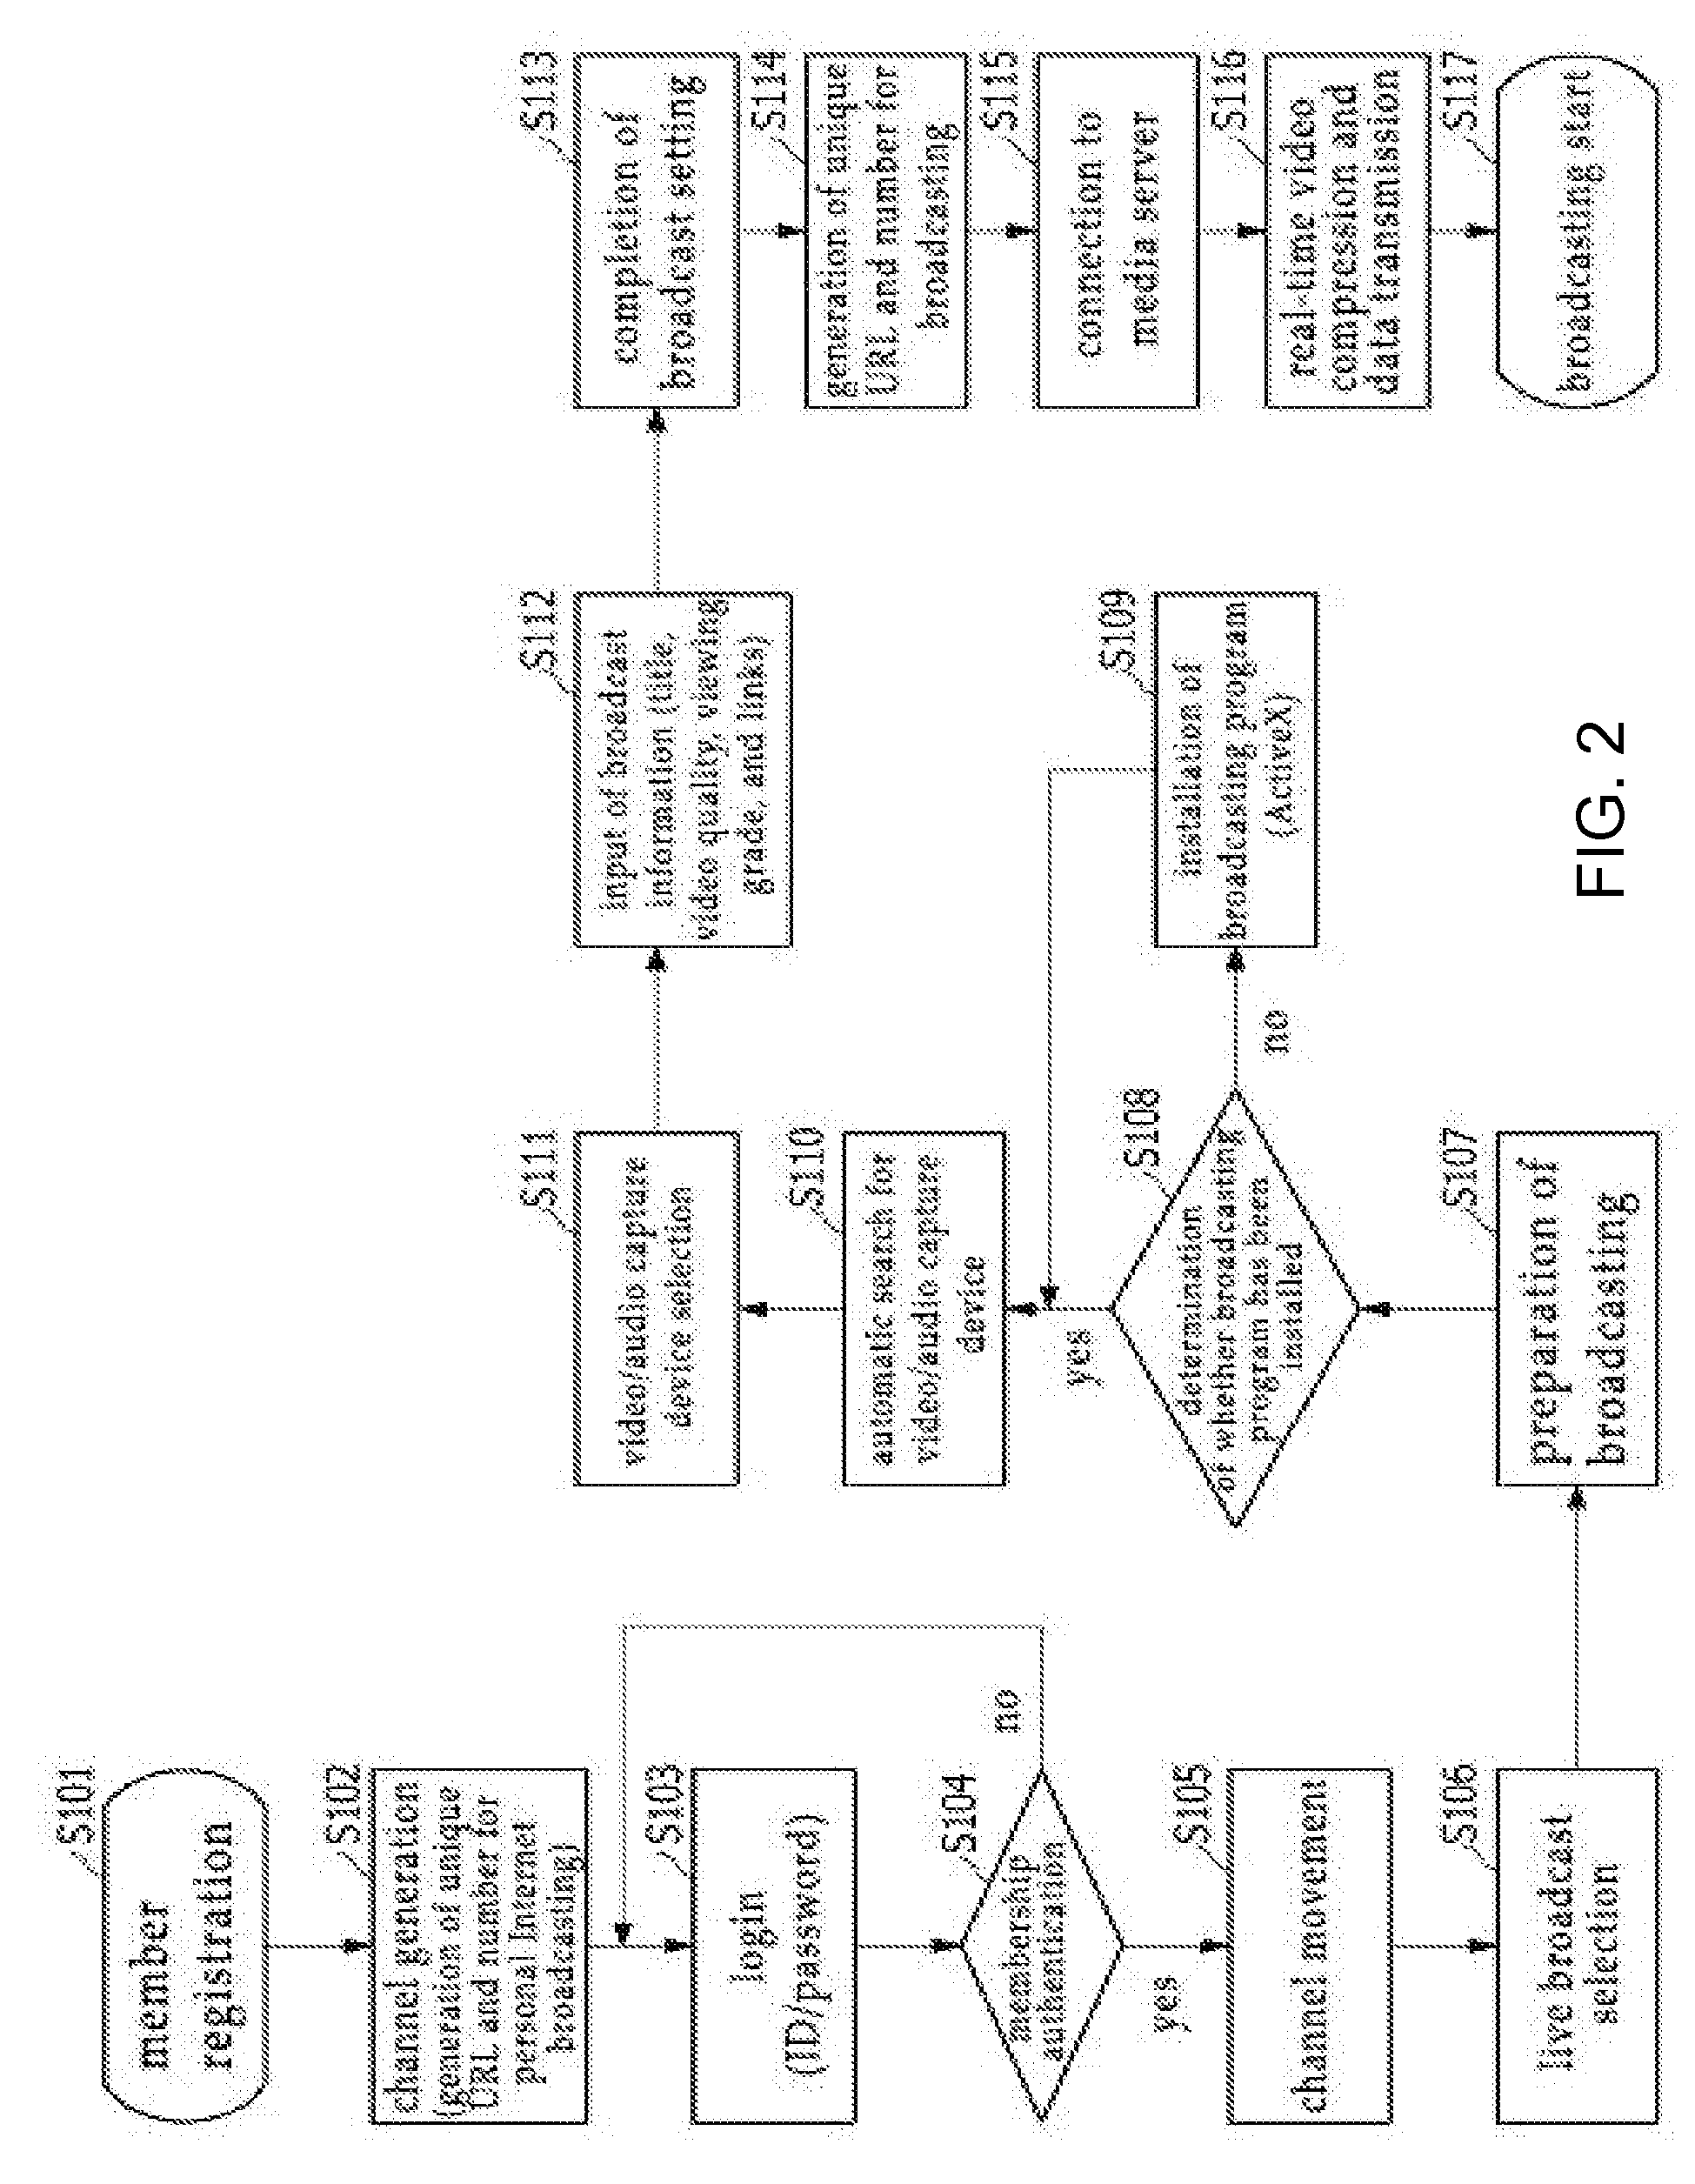 System for personal video broadcasting and service method using internet